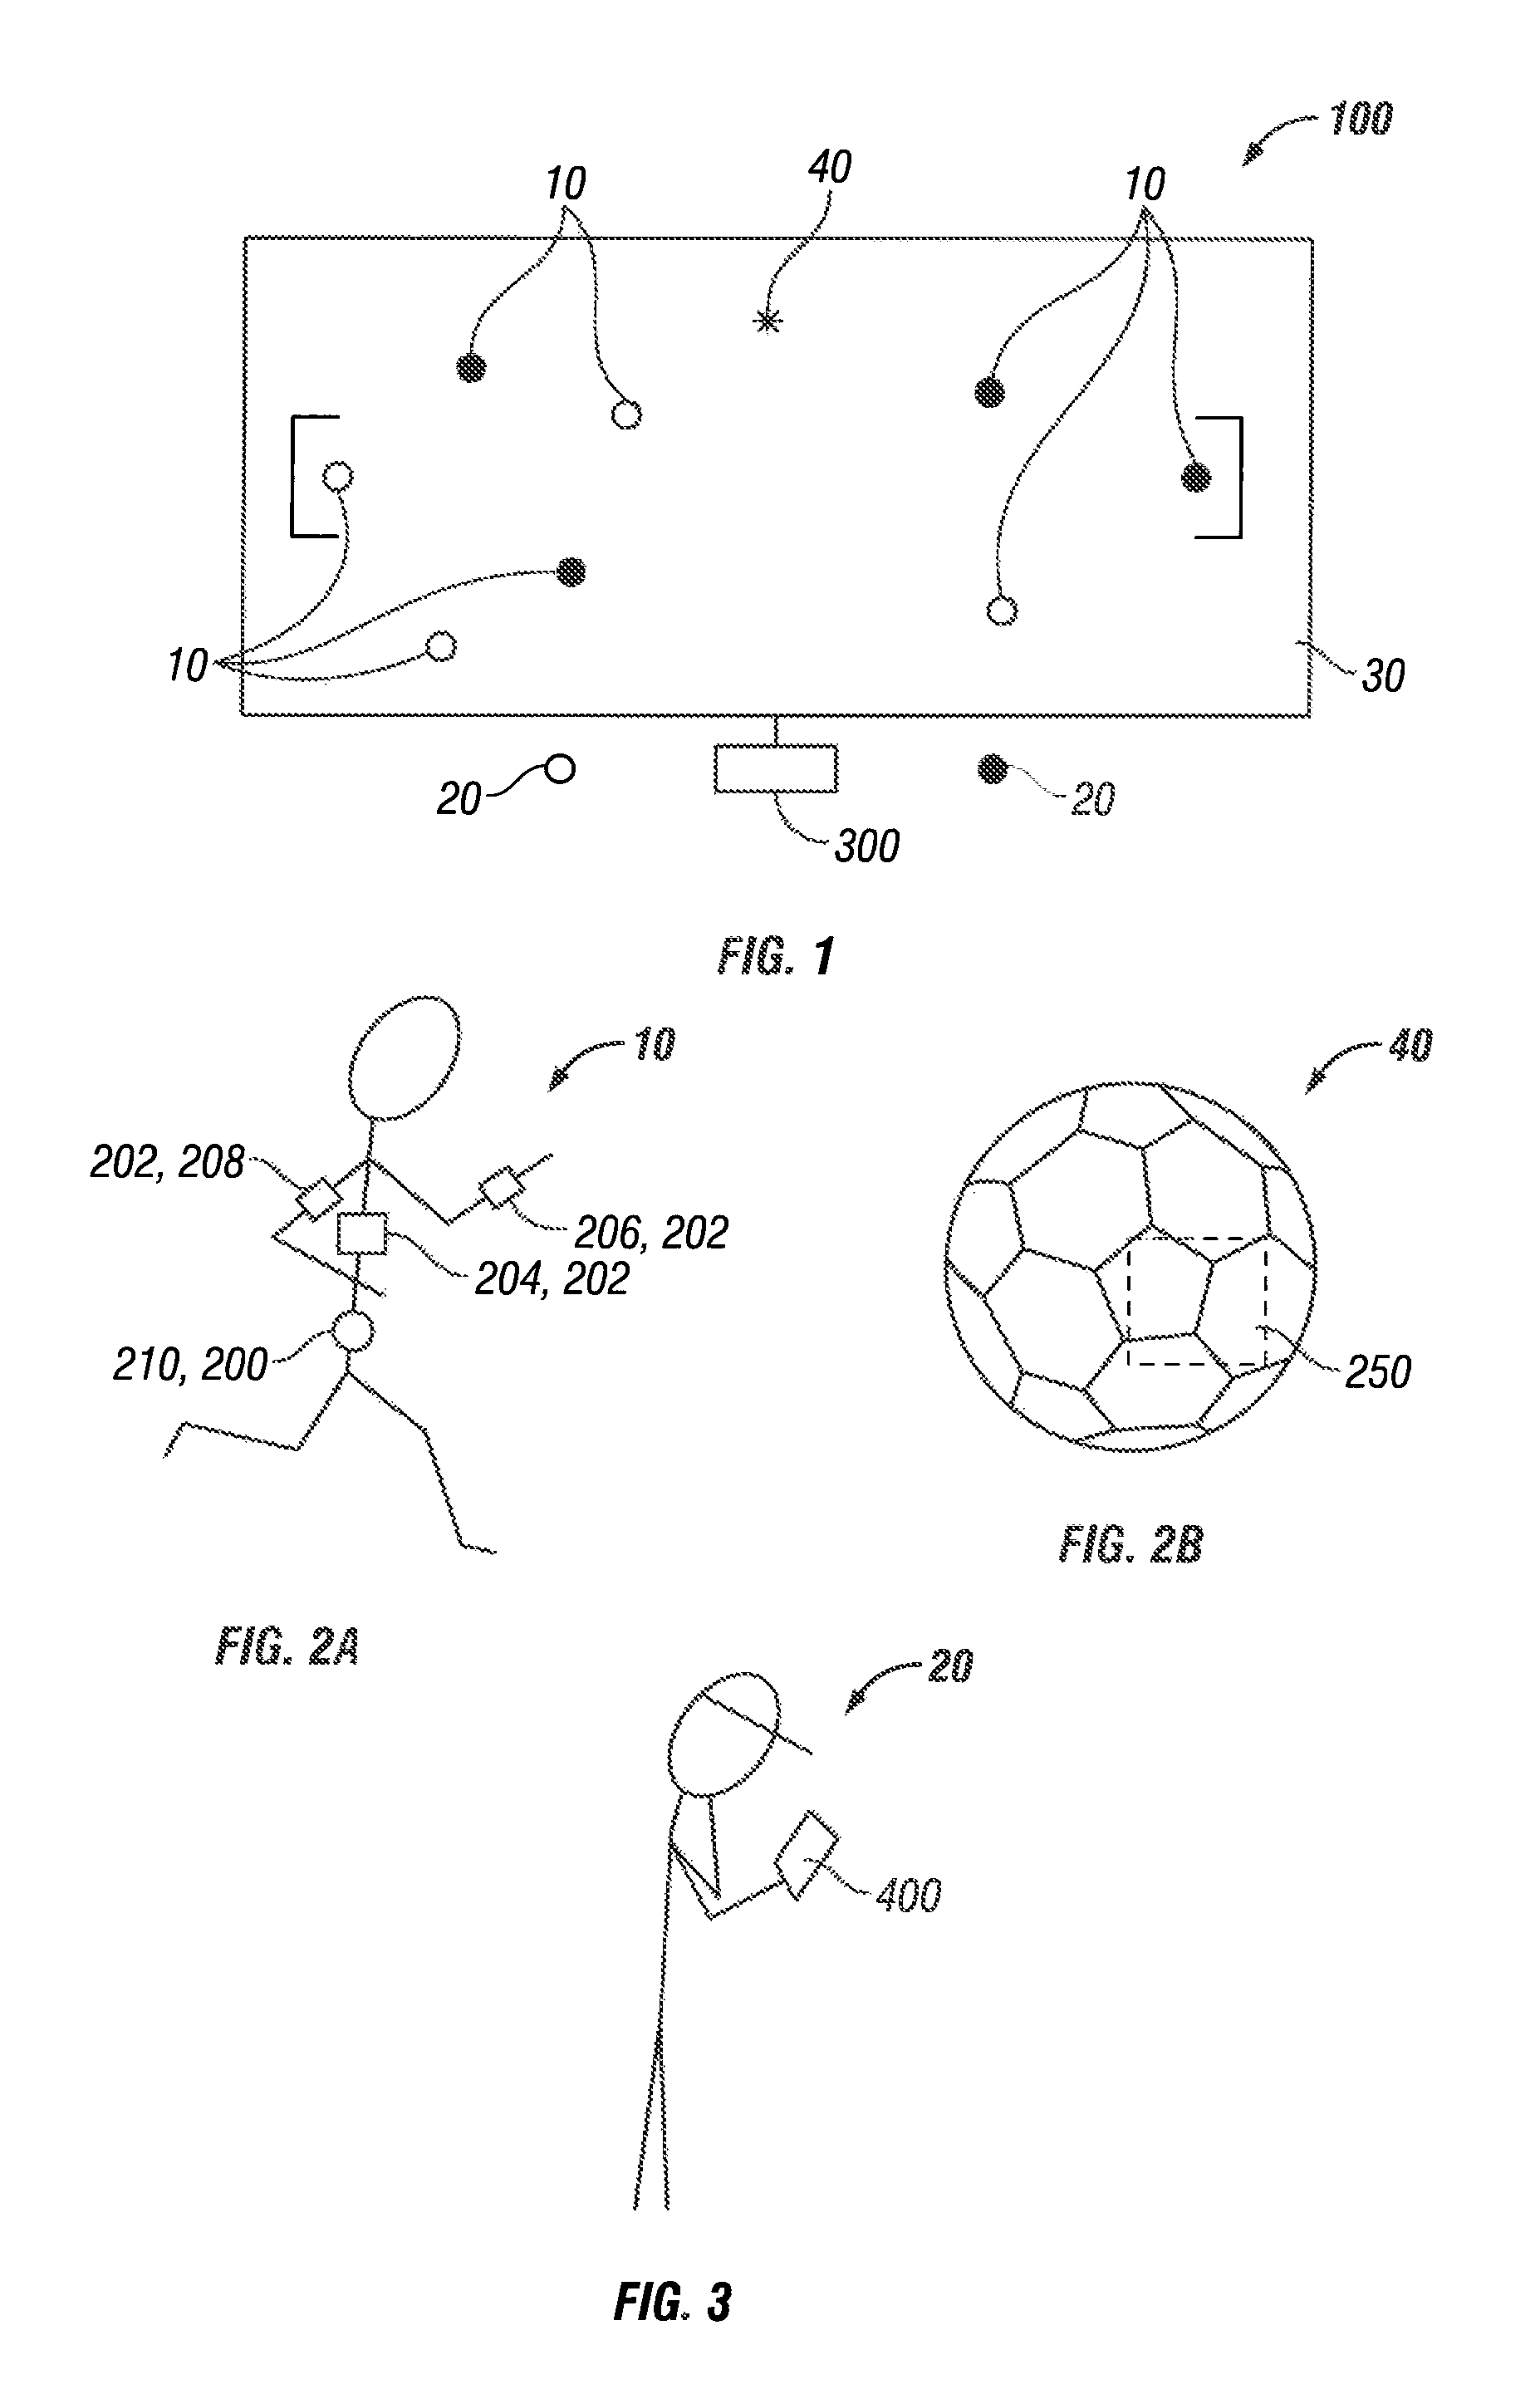 Group performance monitoring system and method